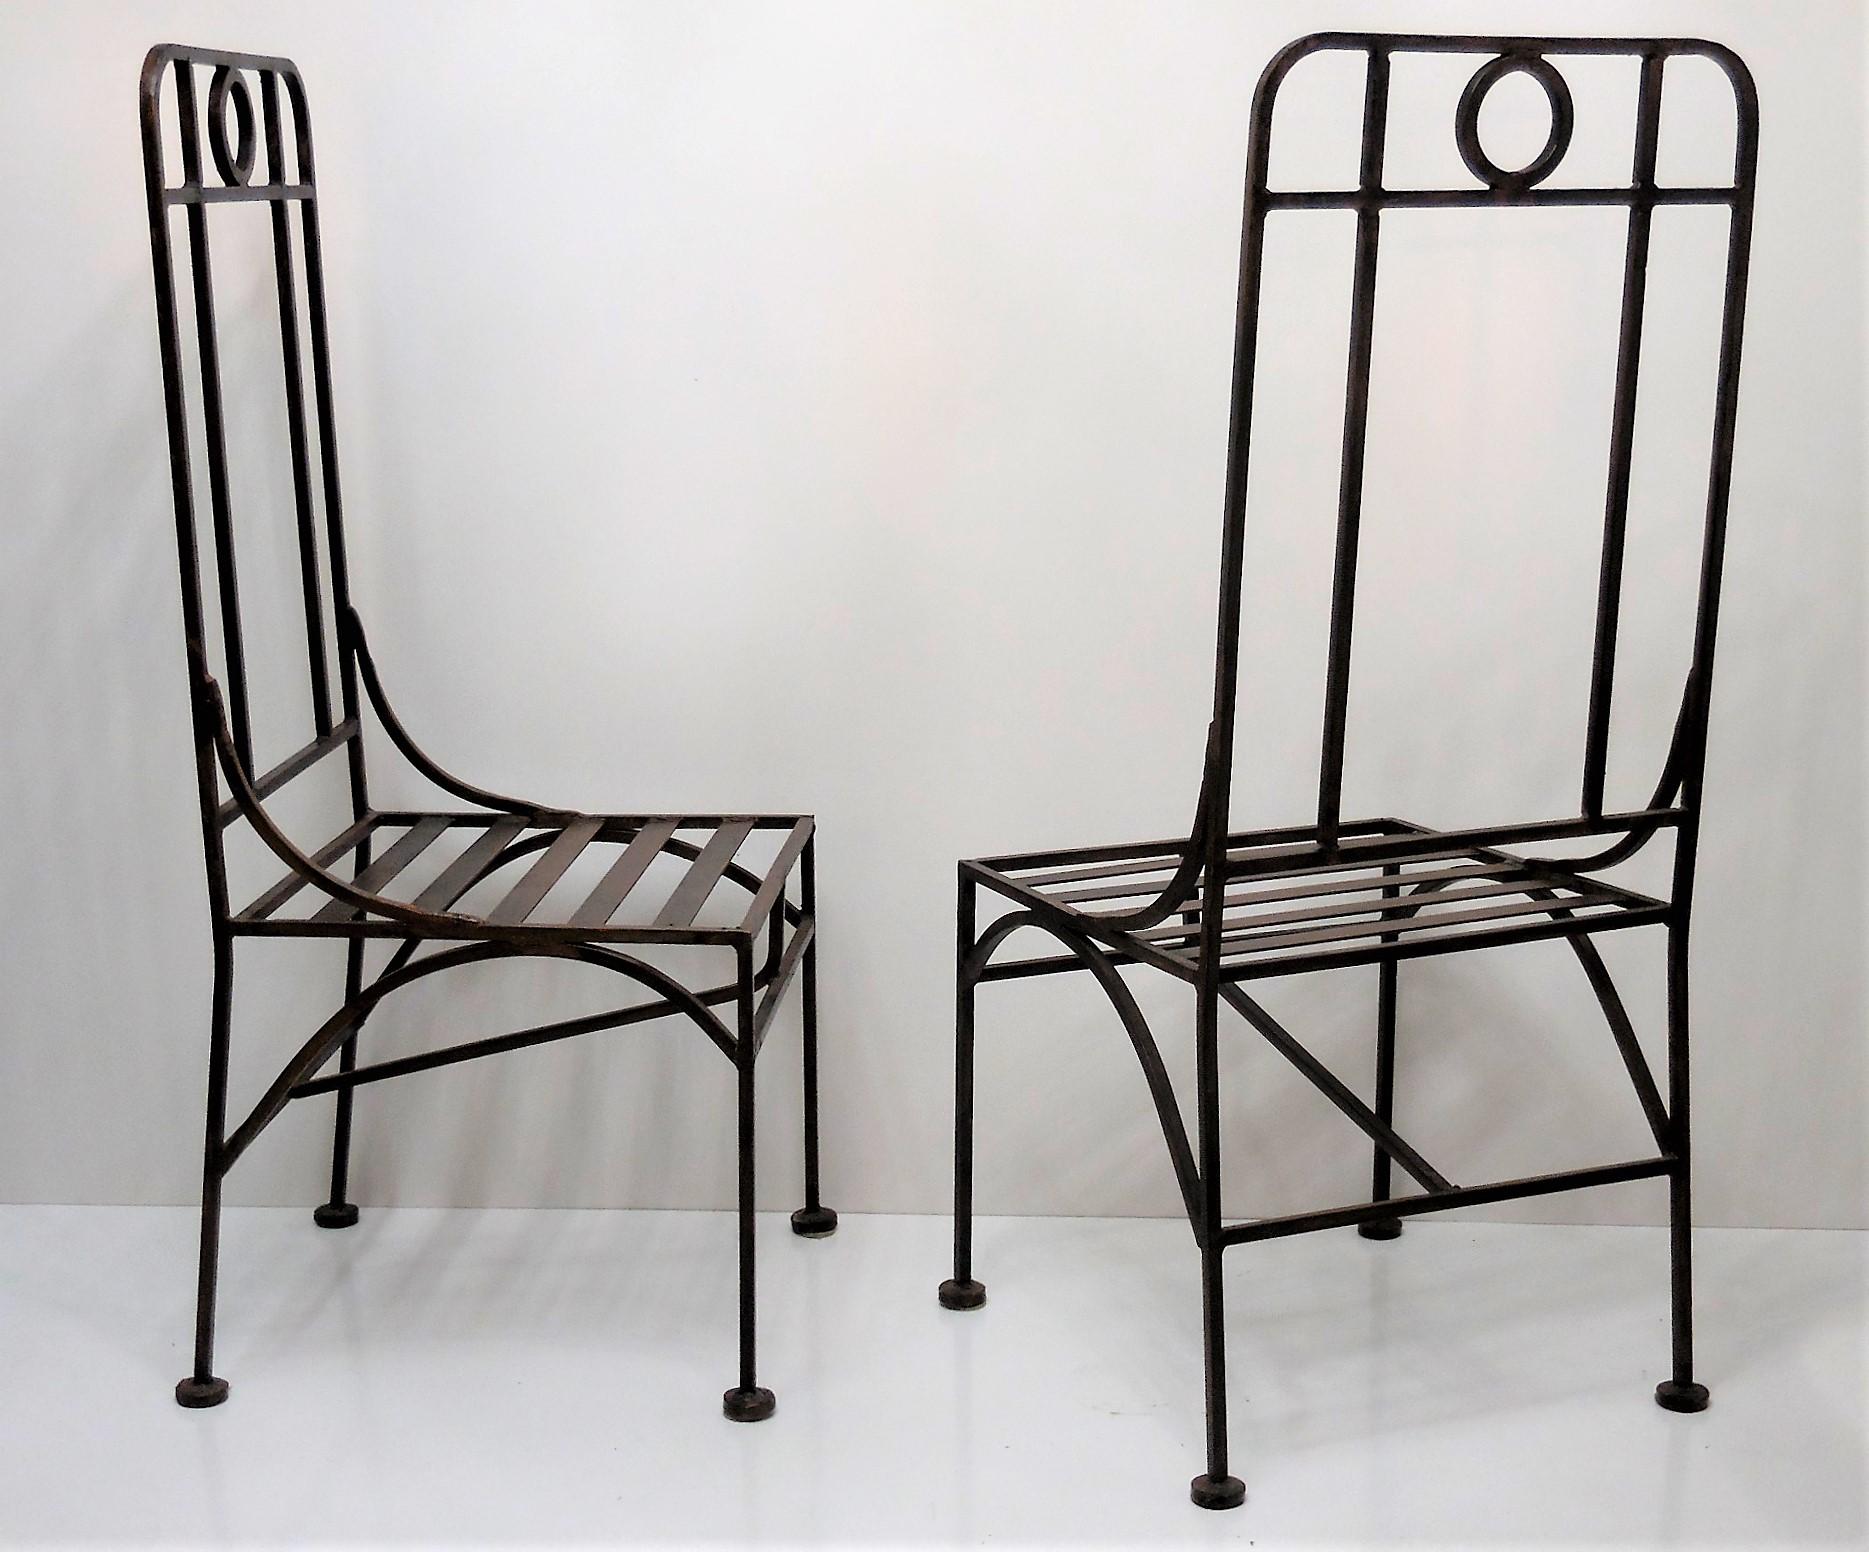 A pair of chairs, three pairs available. Steel construction with a beautiful bronze patina. Handsome design with pure lines and proportions. Made to be used outdoors as well as indoors. Spectacular from any angle.